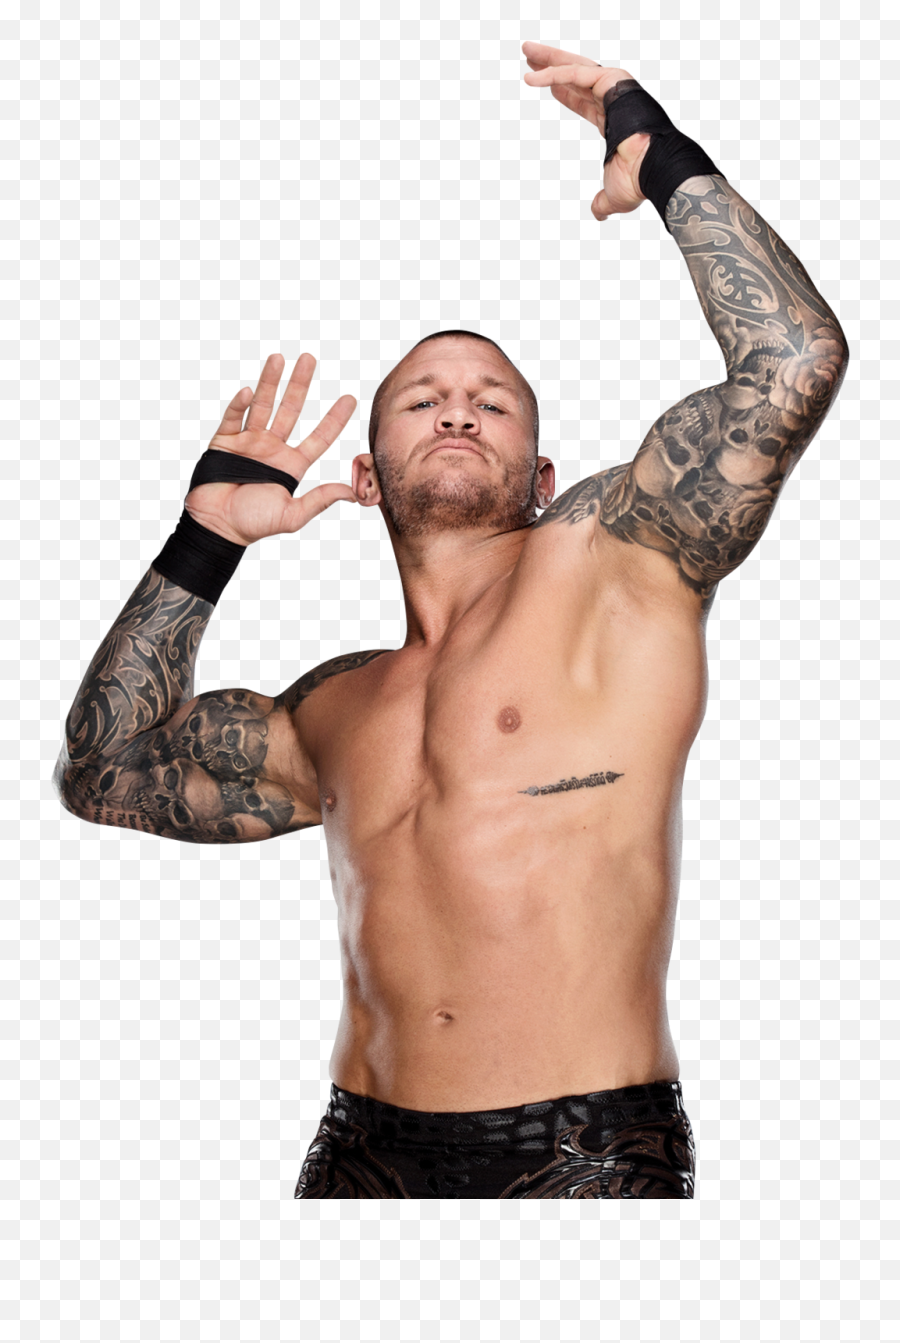 Randy Orton Png Transparent Images - Randy Orton Chest Tattoo,Randy Orton Png